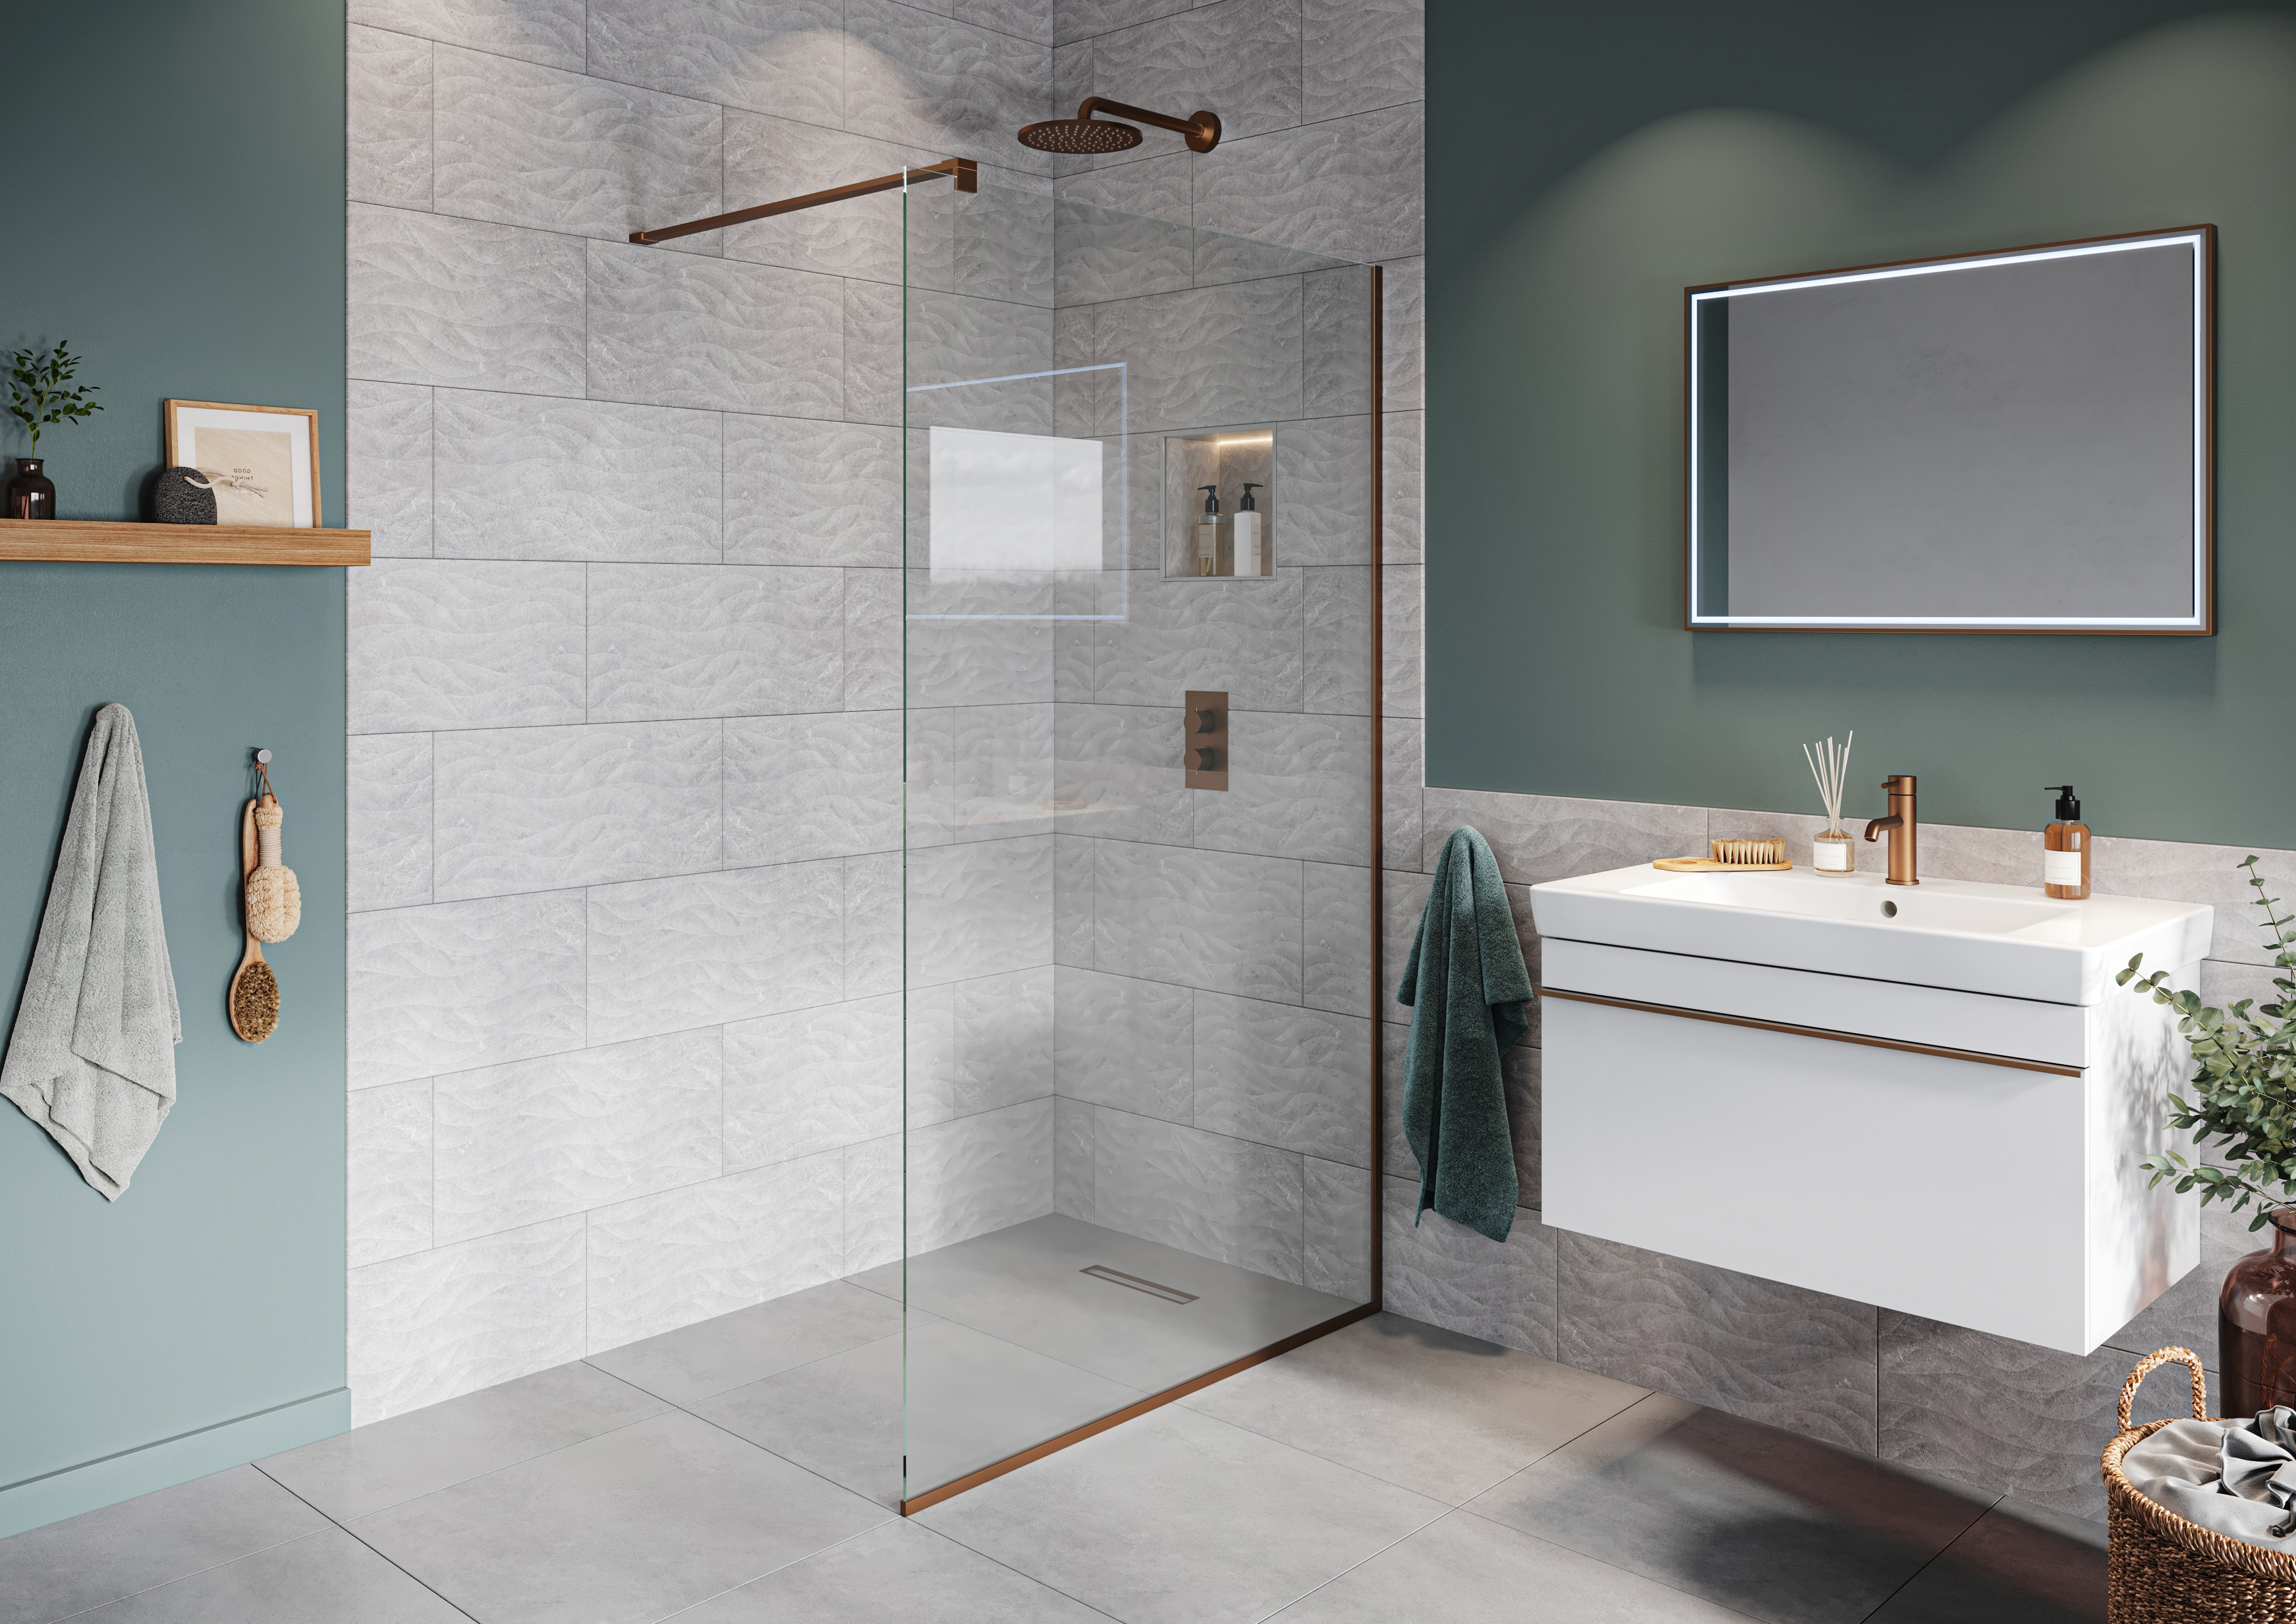 Hadleigh 8mm Brushed Bronze Frameless Wetroom Screen with Wall Arm - 900mm